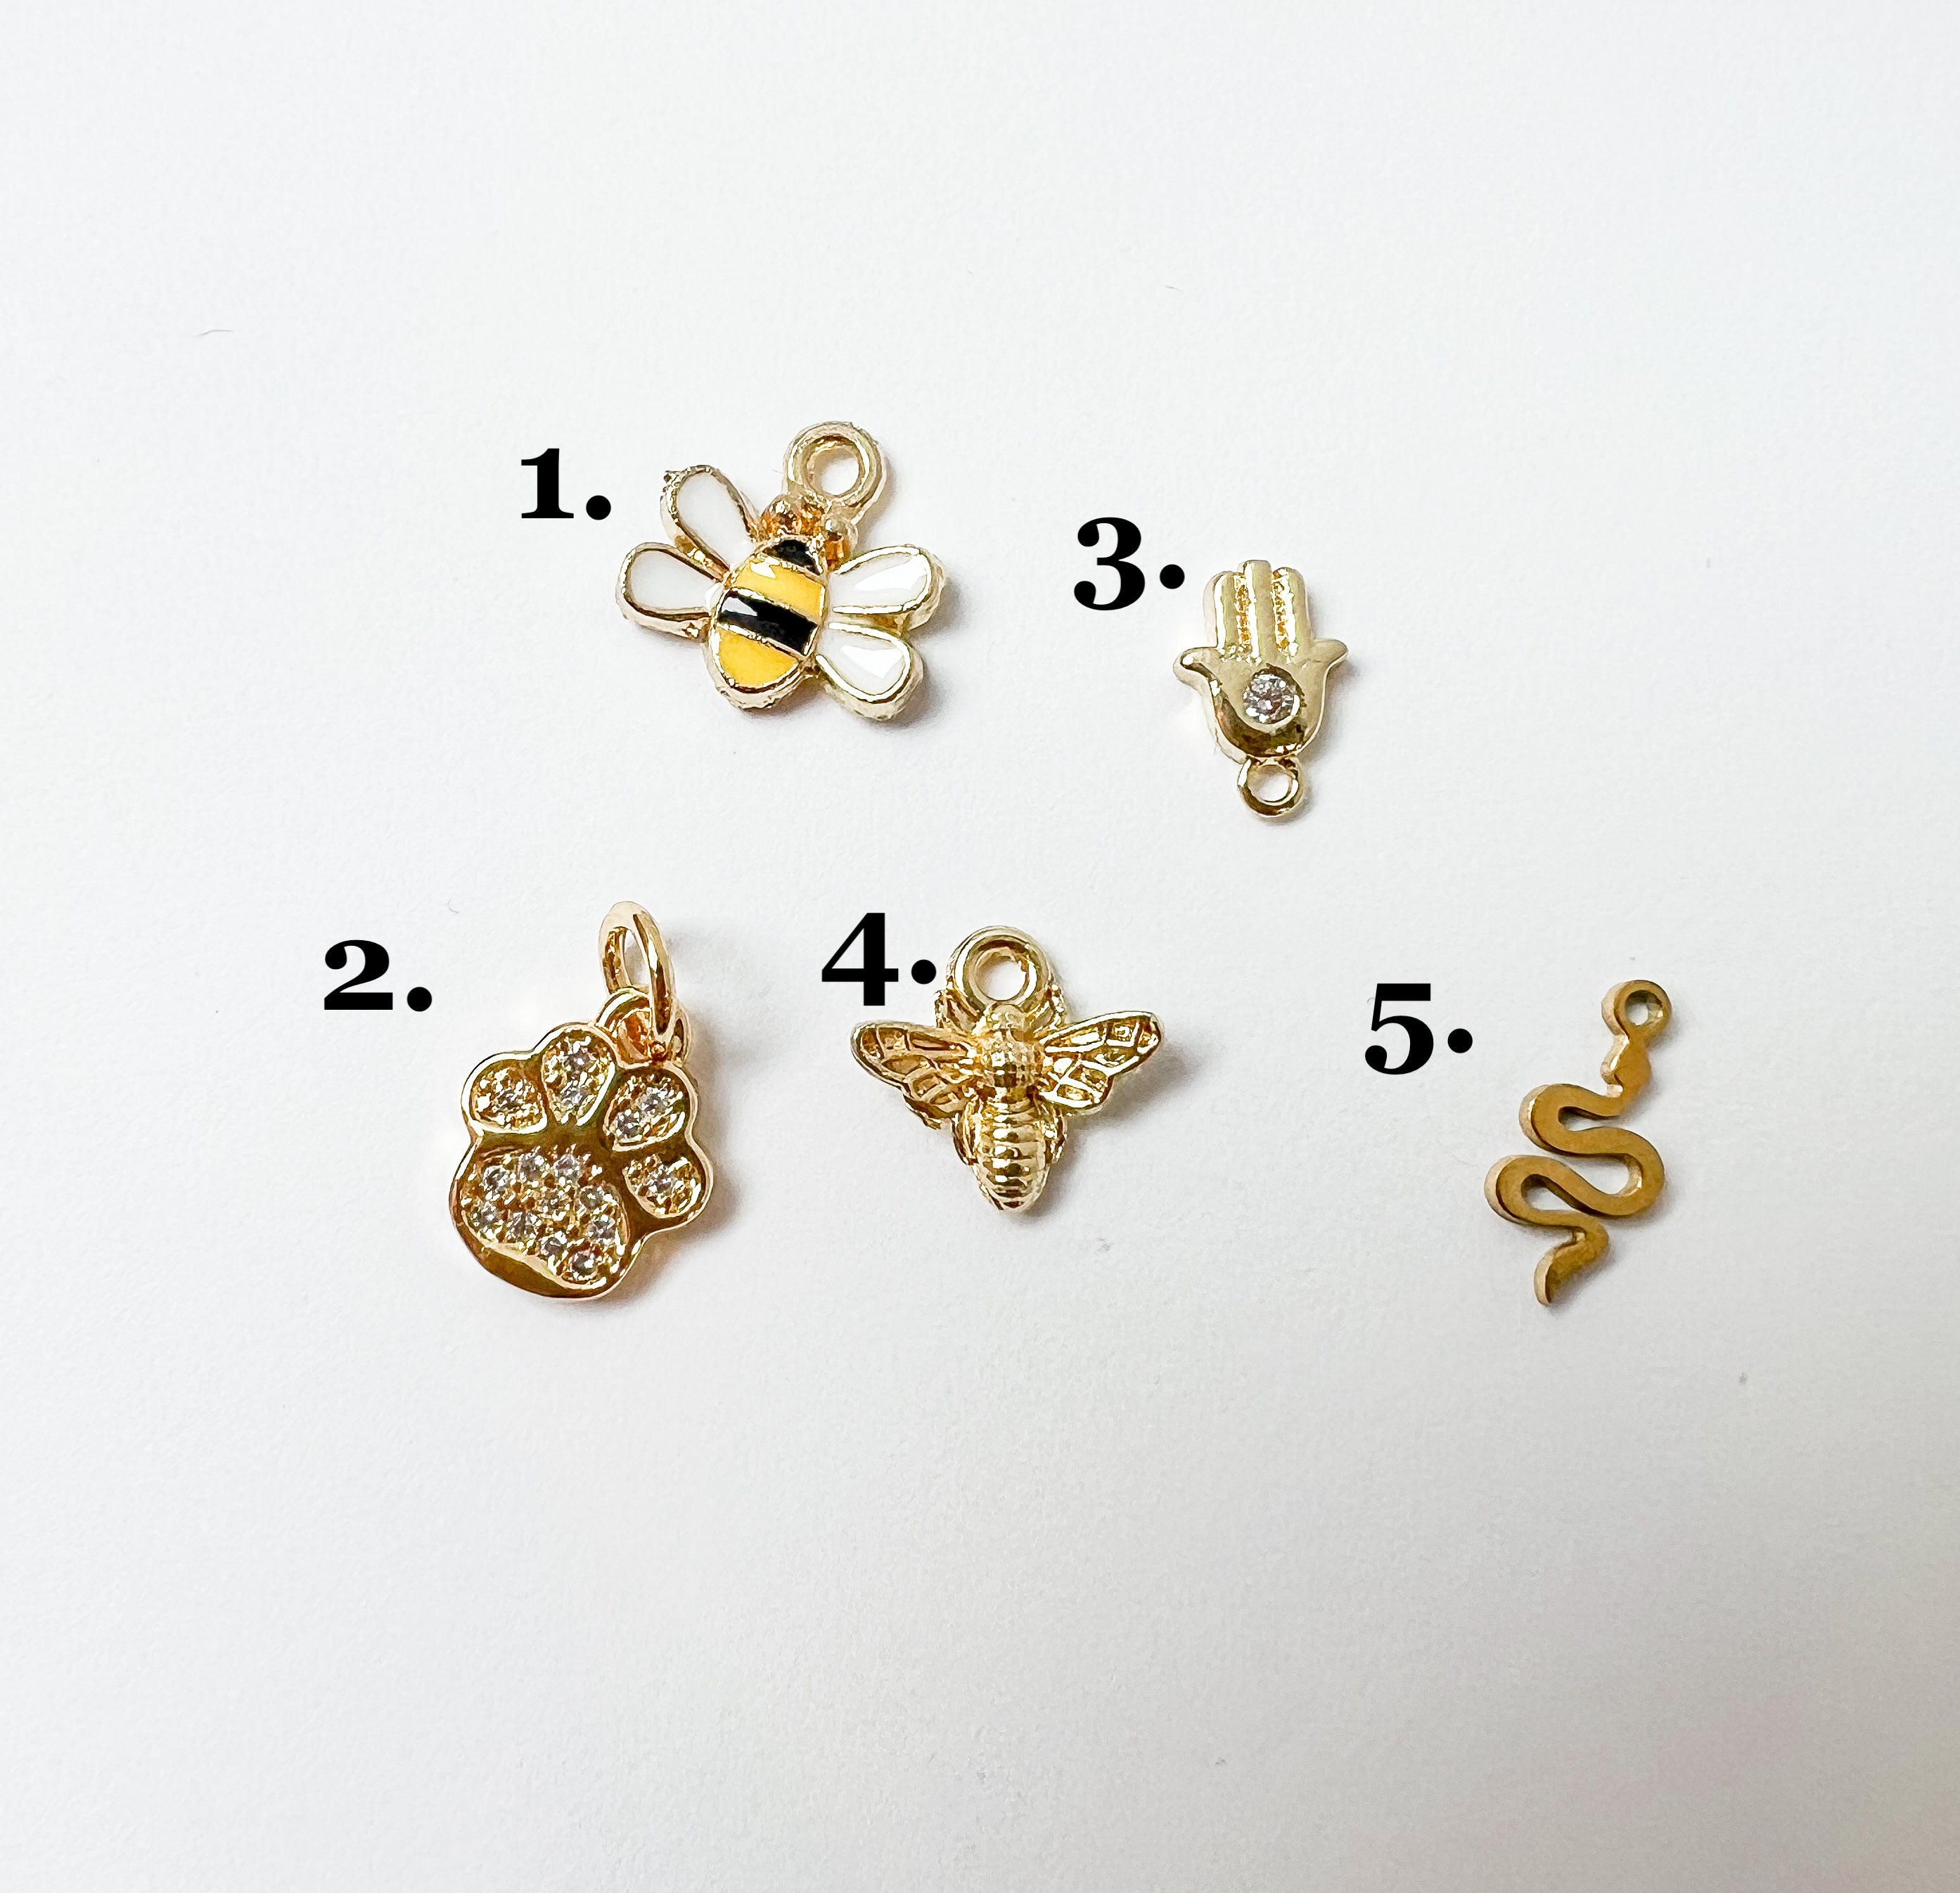 Choose your charms: Small charms